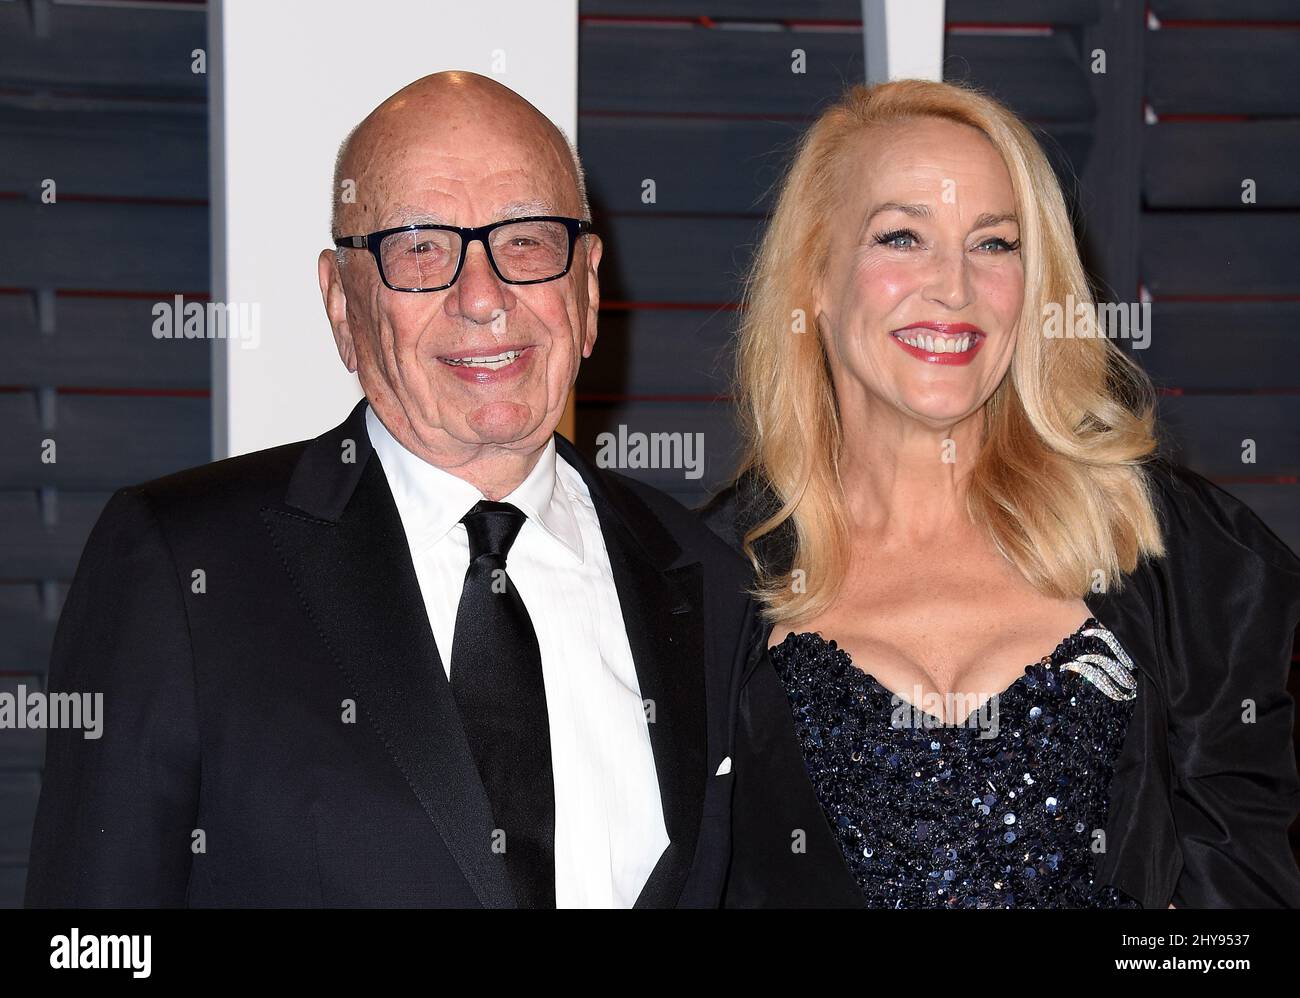 Rupert Murdoch and Jerry Hall attending the 2016 Vanity Fair Oscar Party Hosted By Graydon Carter held at the Wallis Annenberg Center for the Performing Arts Stock Photo